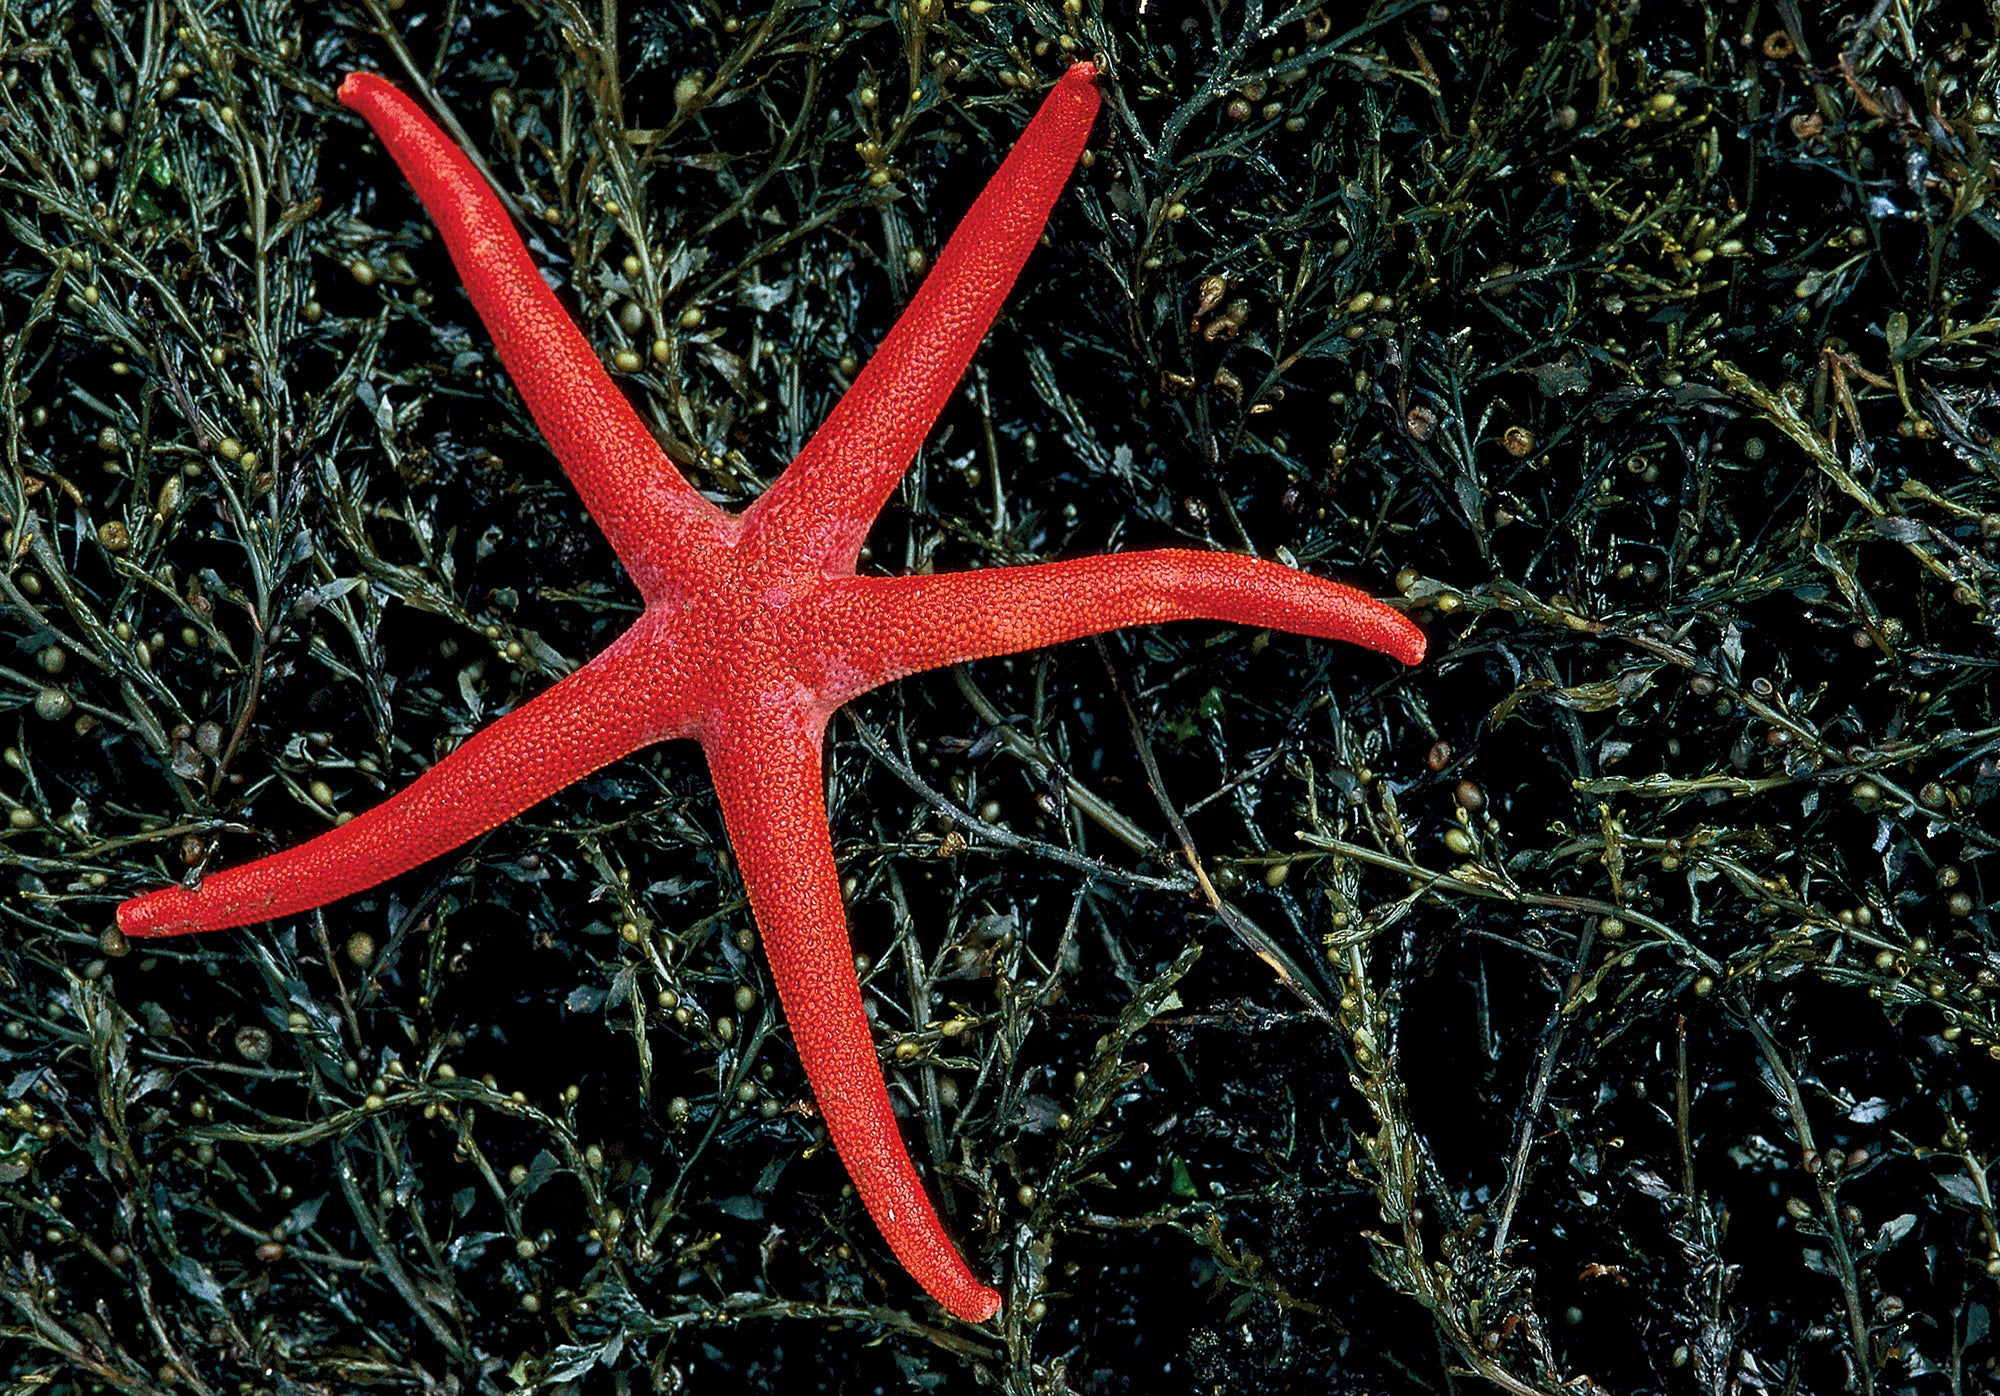 A starfish on a bed of kelp. End of image description.